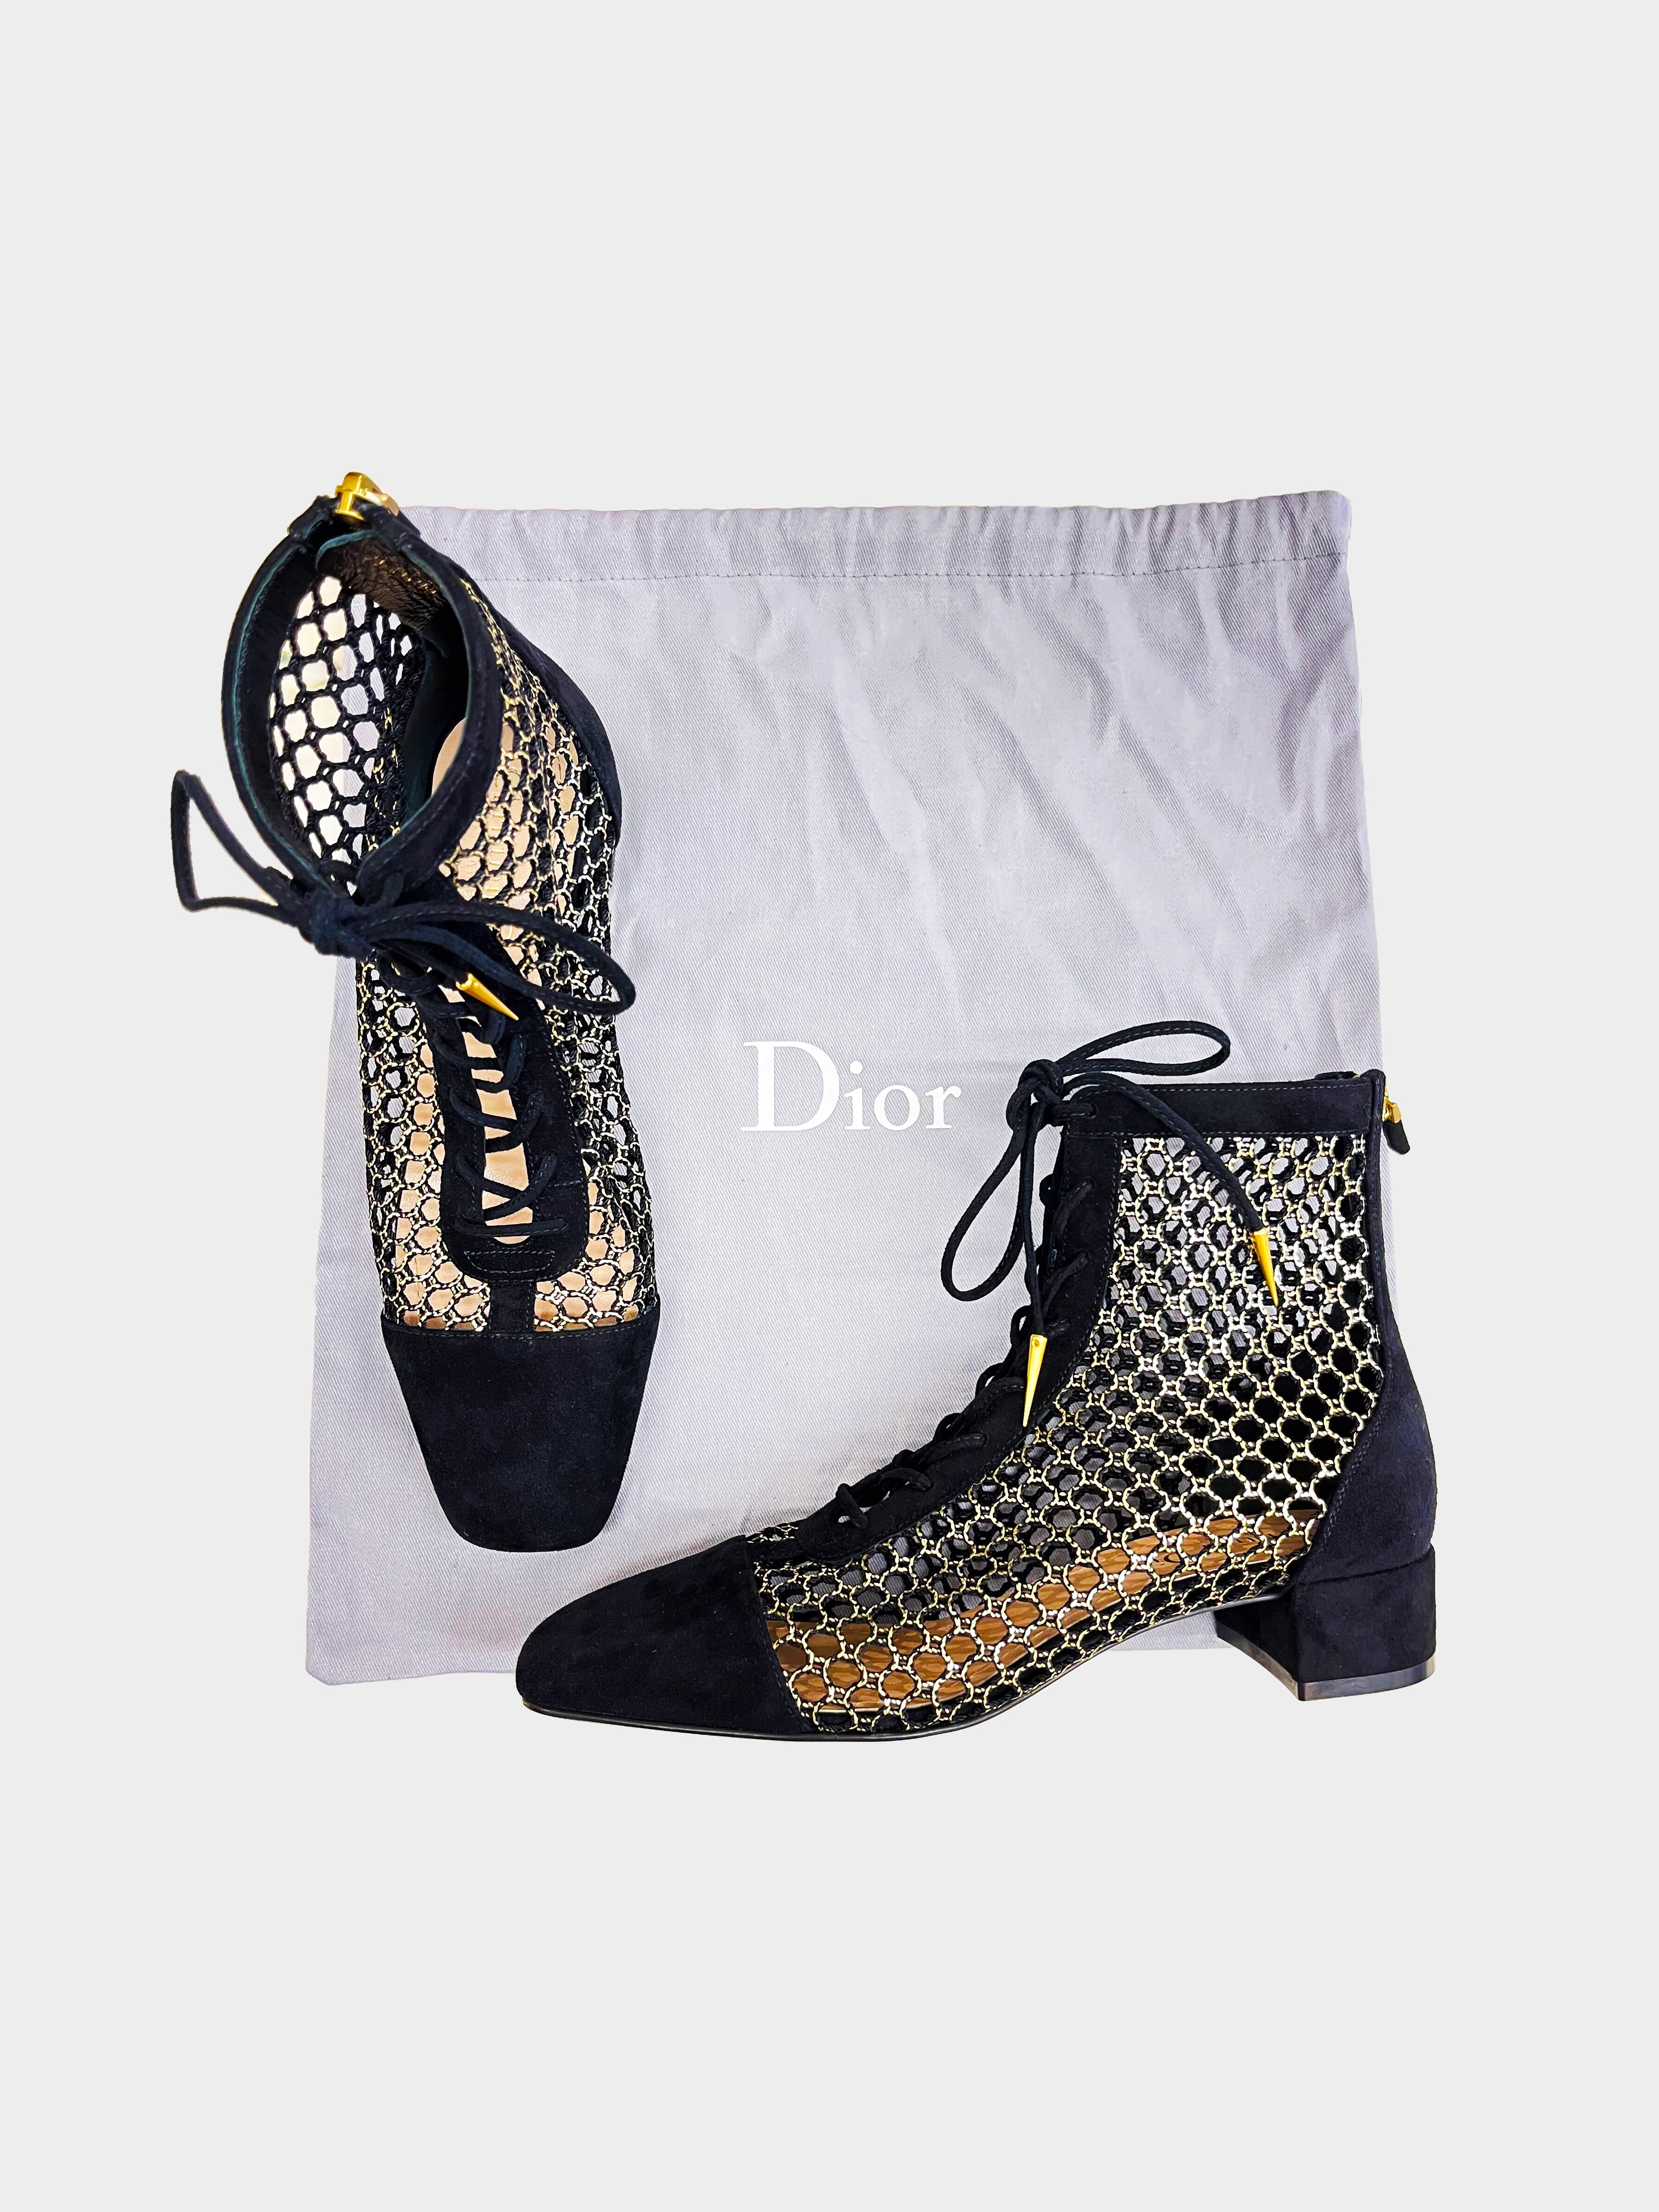 Christian Dior SS 2018 Black and Gold Naughtily-D Ankle Boots · INTO